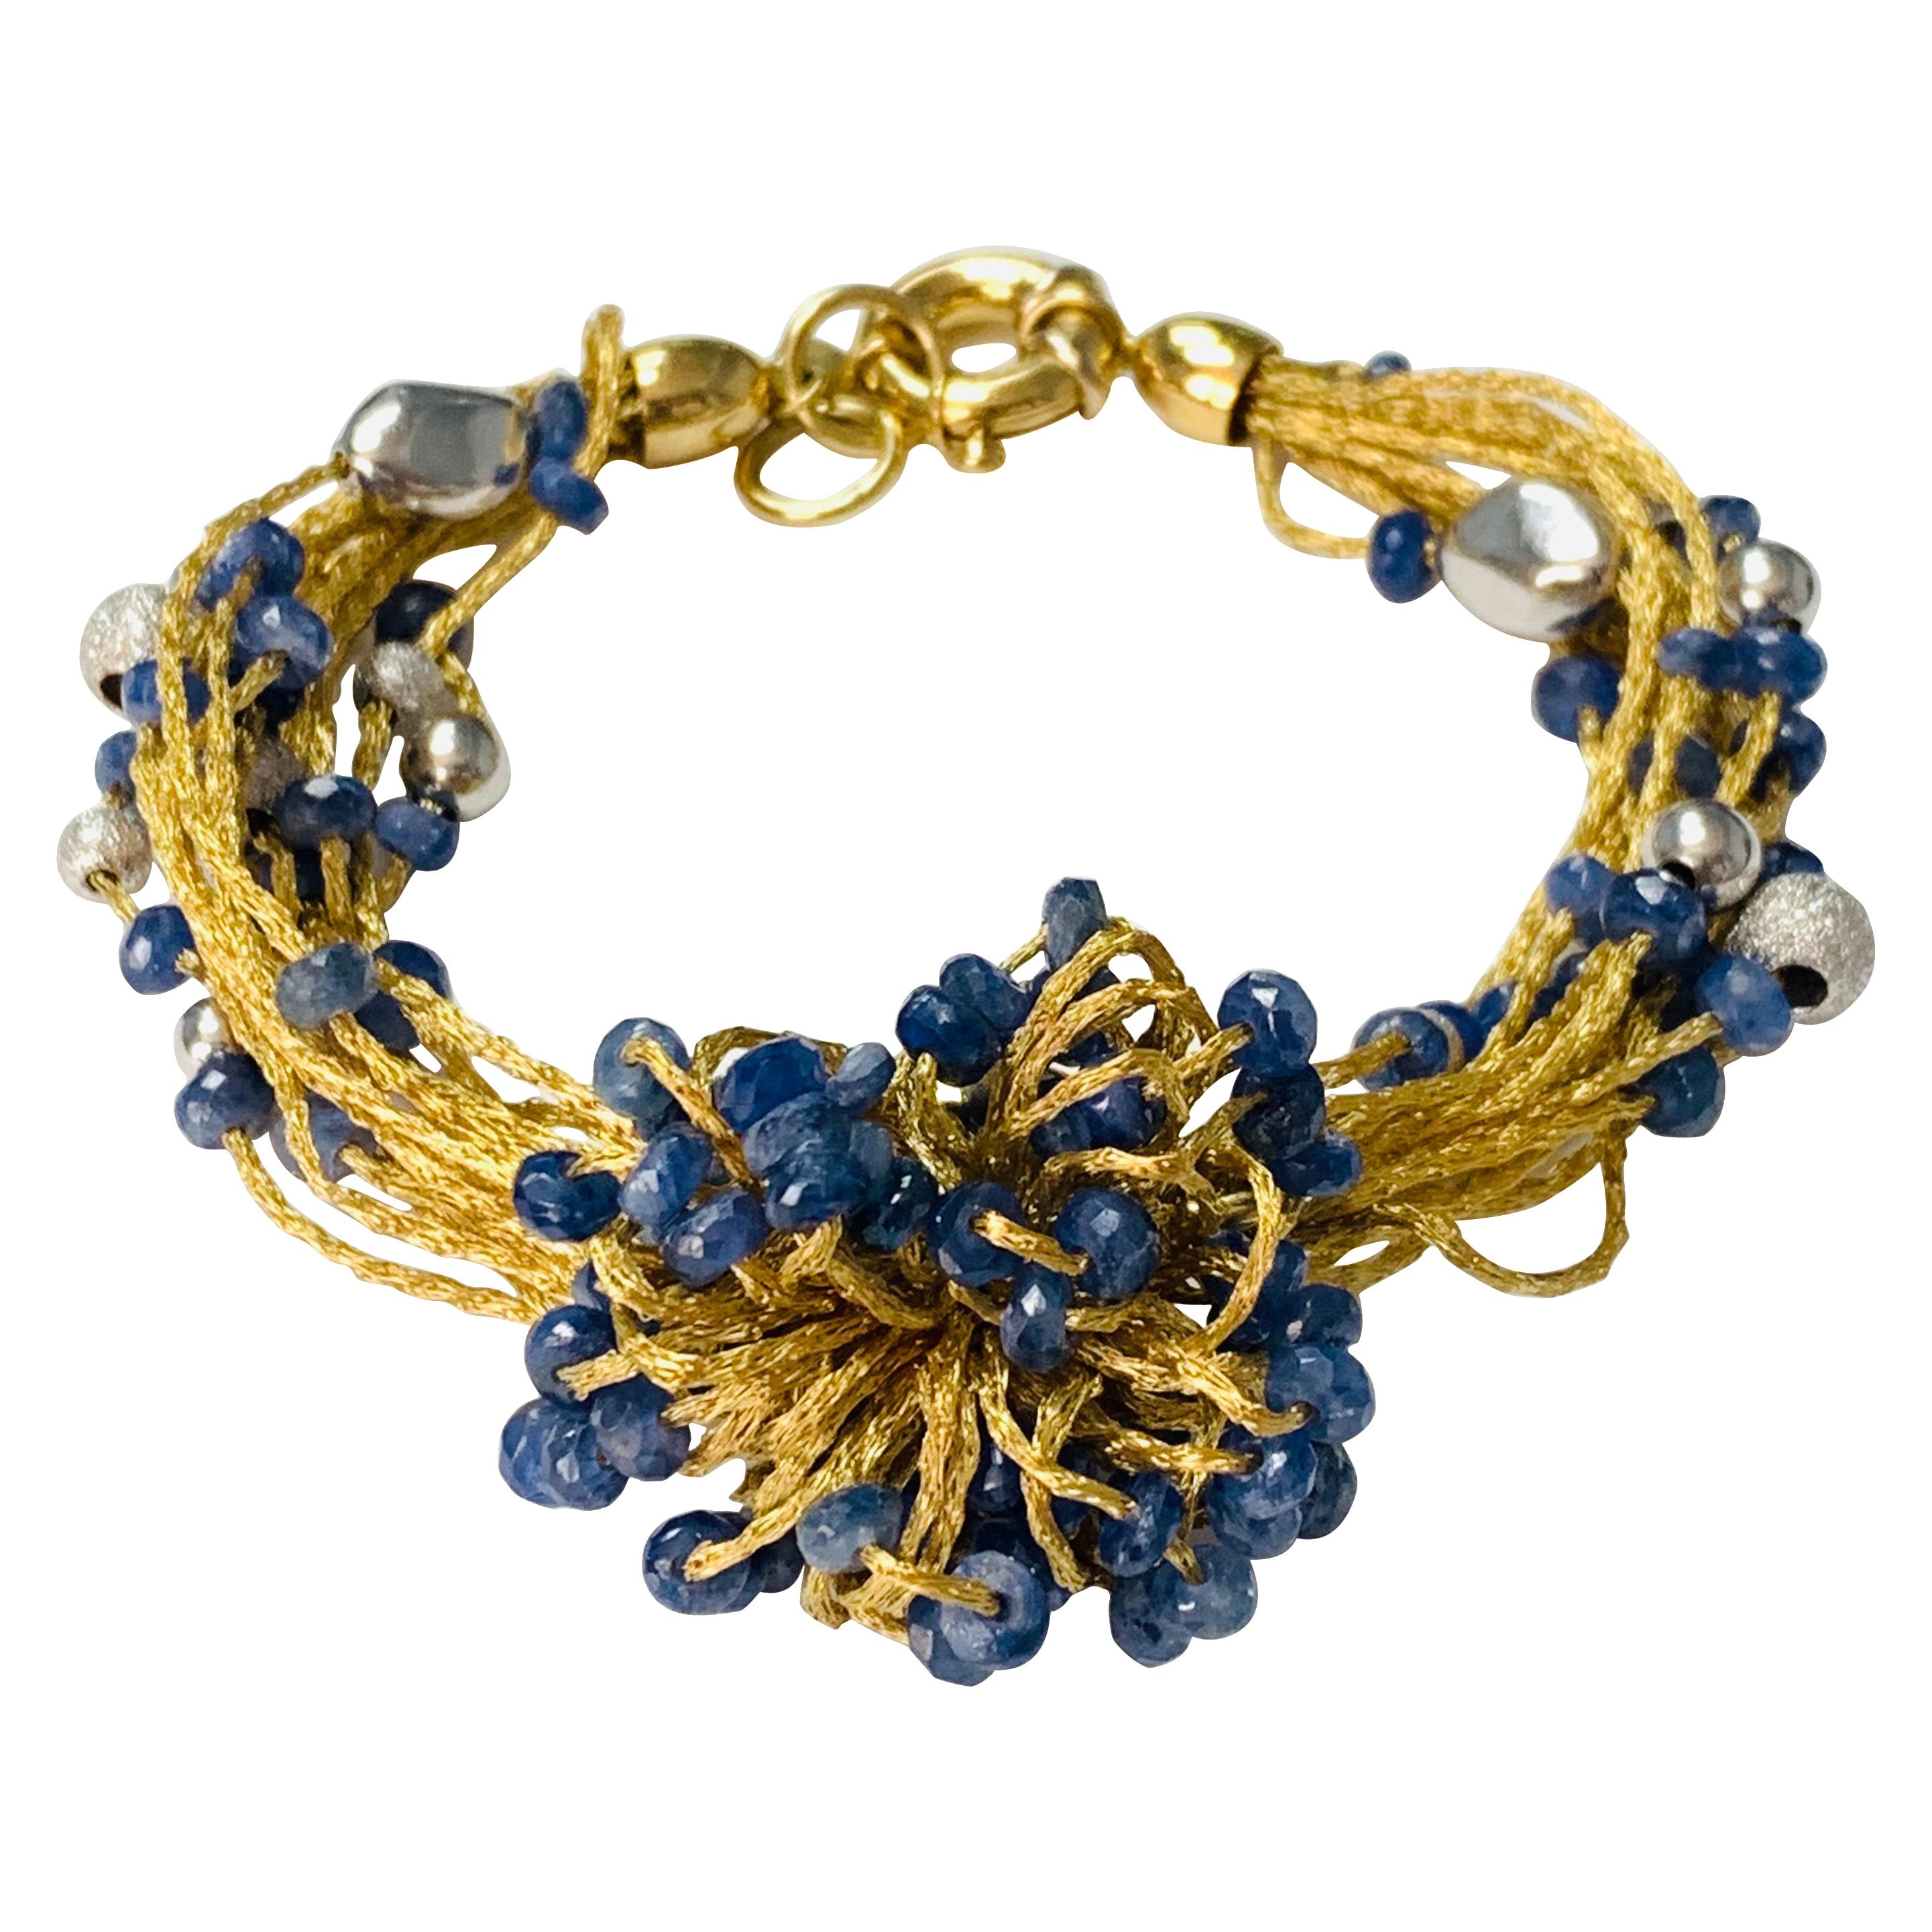 Blue Sapphire Beads, White Gold and Yellow Gold Bracelet